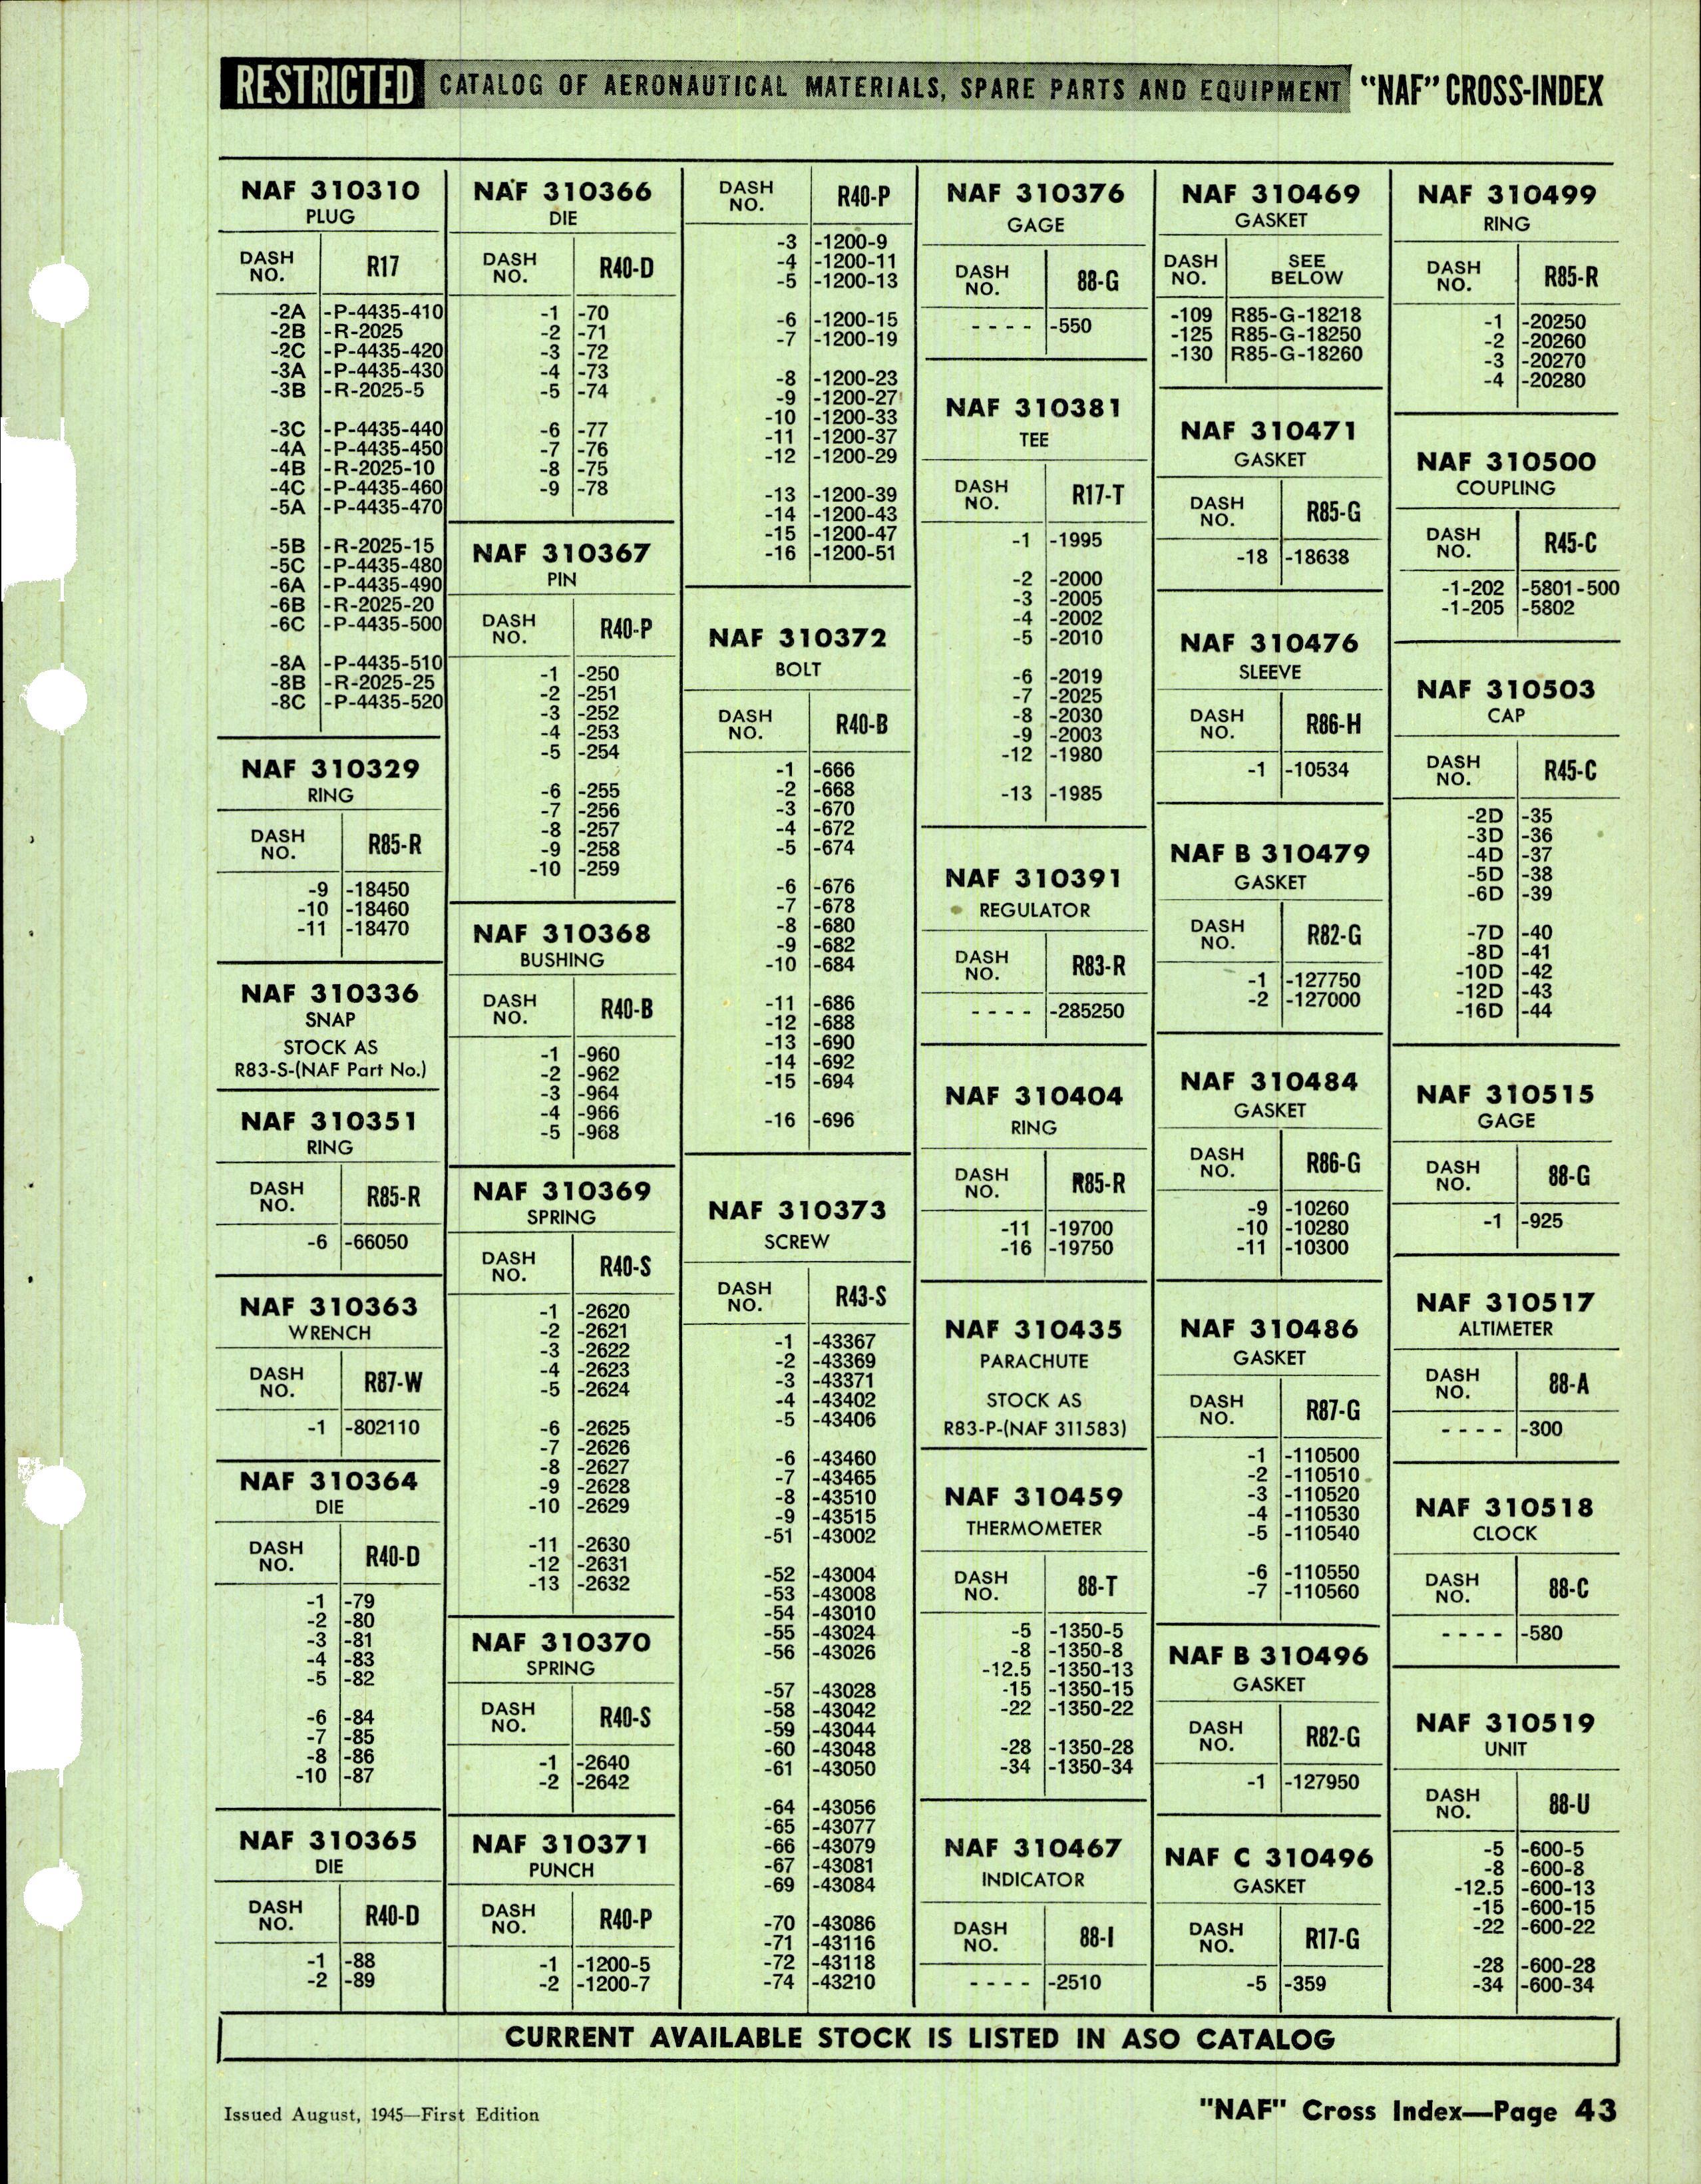 Sample page 43 from AirCorps Library document: Naval Aircraft Factory Cross Index to Navy Stock Numbers